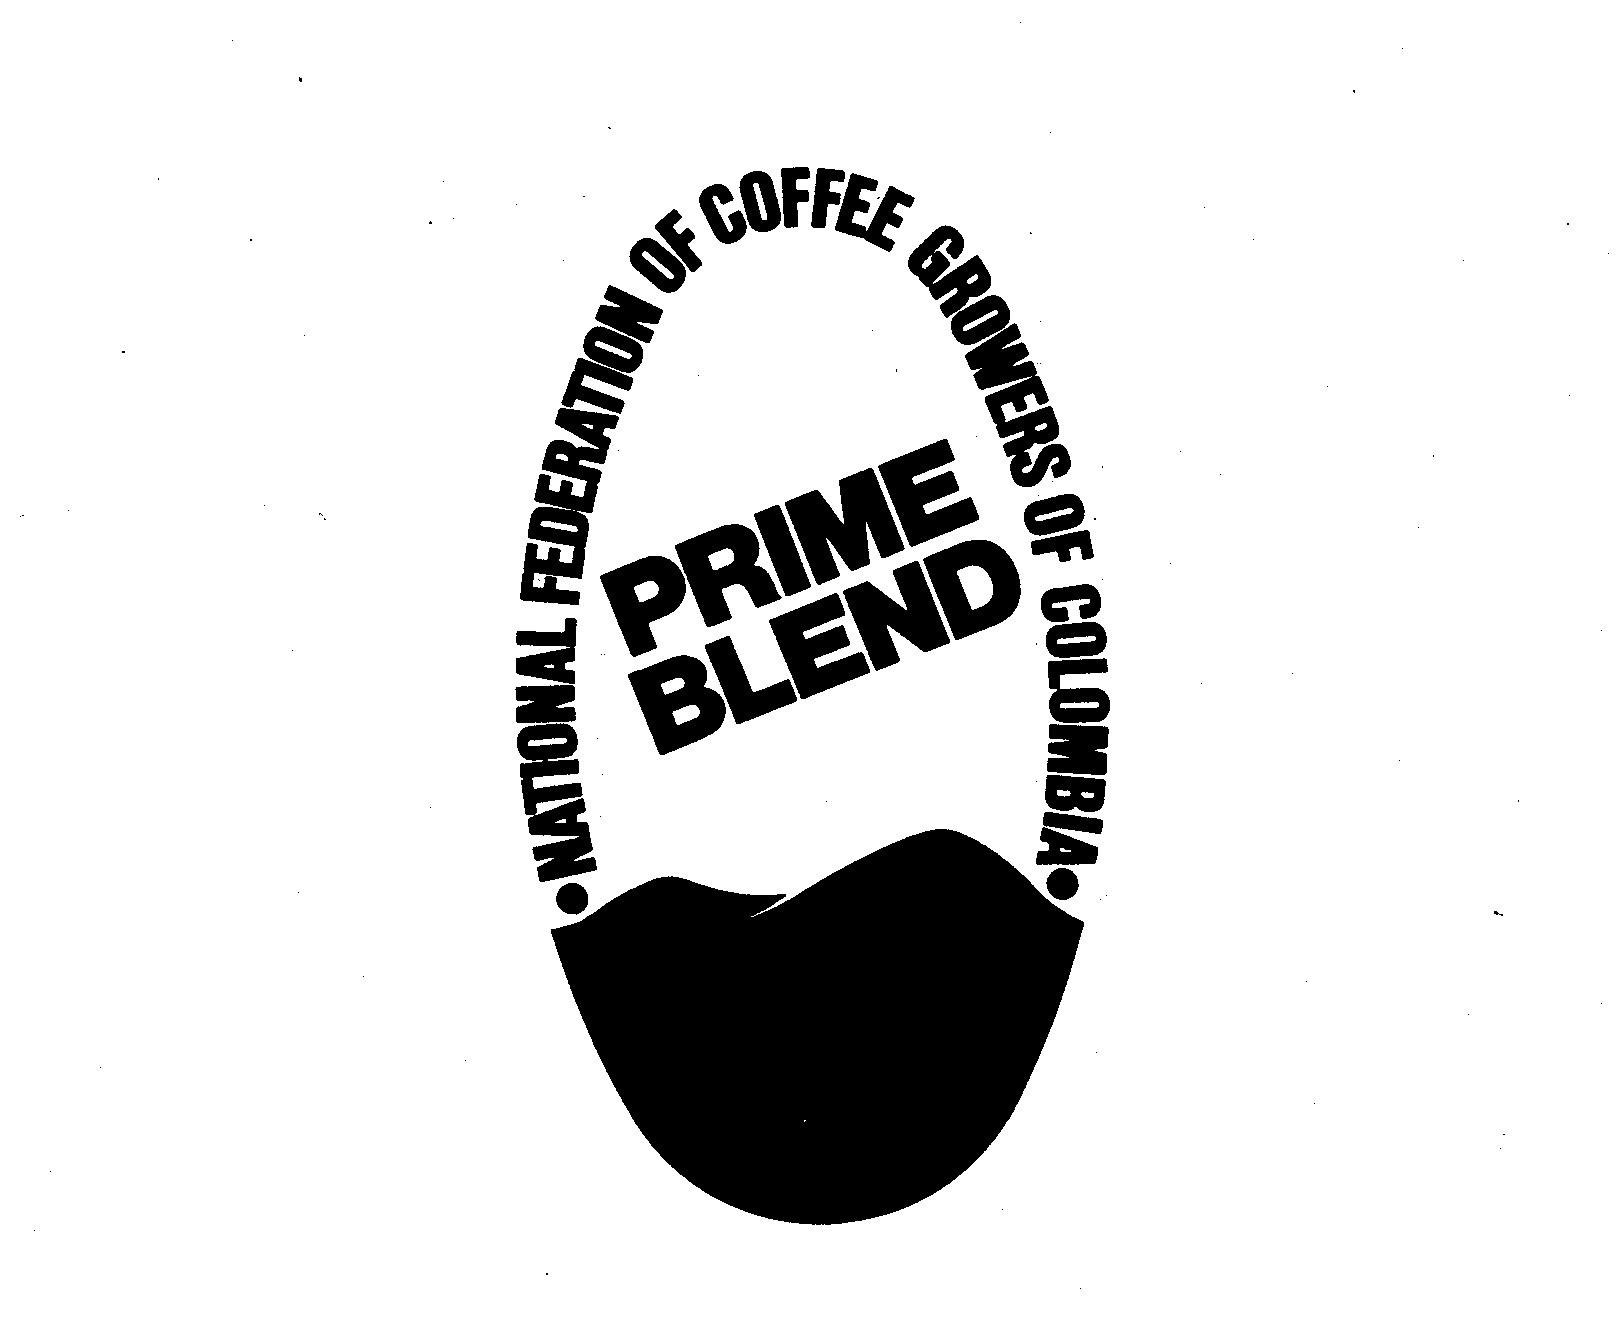  PRIME BLEND NATIONAL FEDERATION OF COFFEE GROWERS OF COLUMBIA